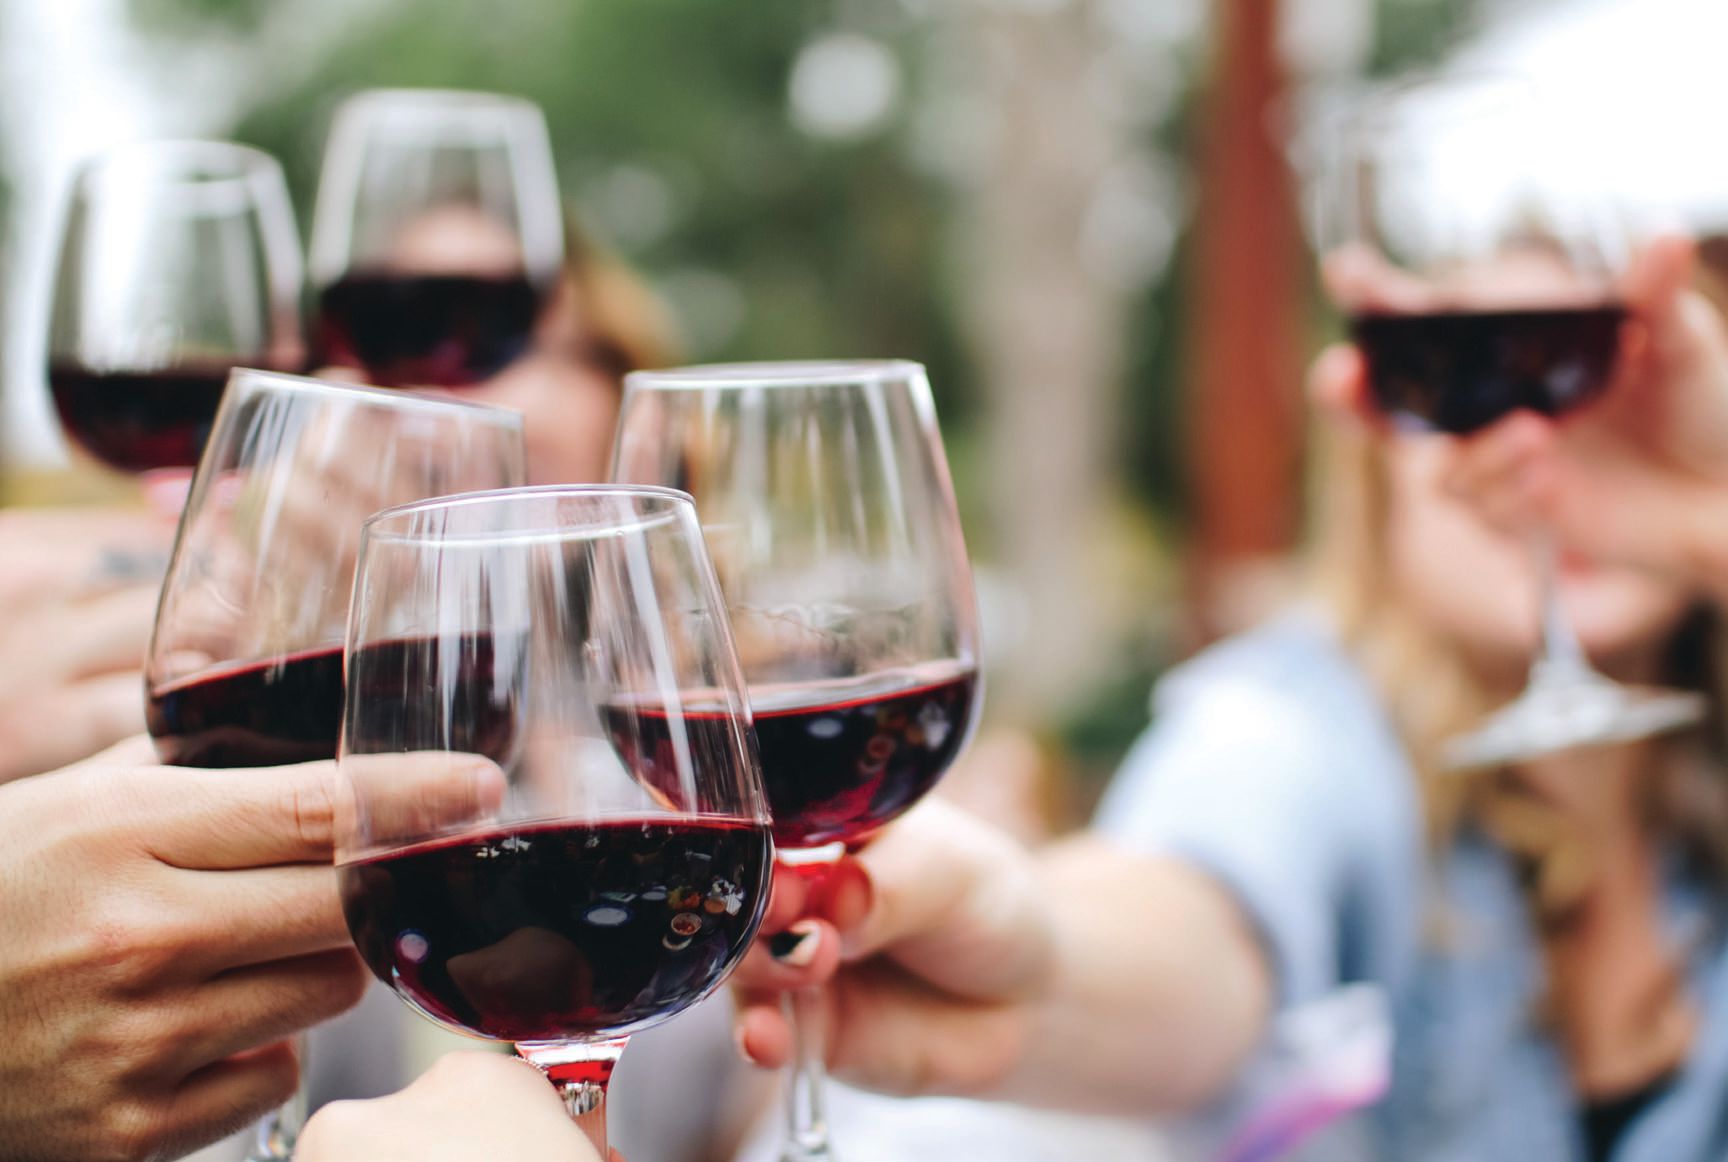 Melier curates wine country experiences PHOTO: BY KELSEY KNIGHT/UNSPLASH